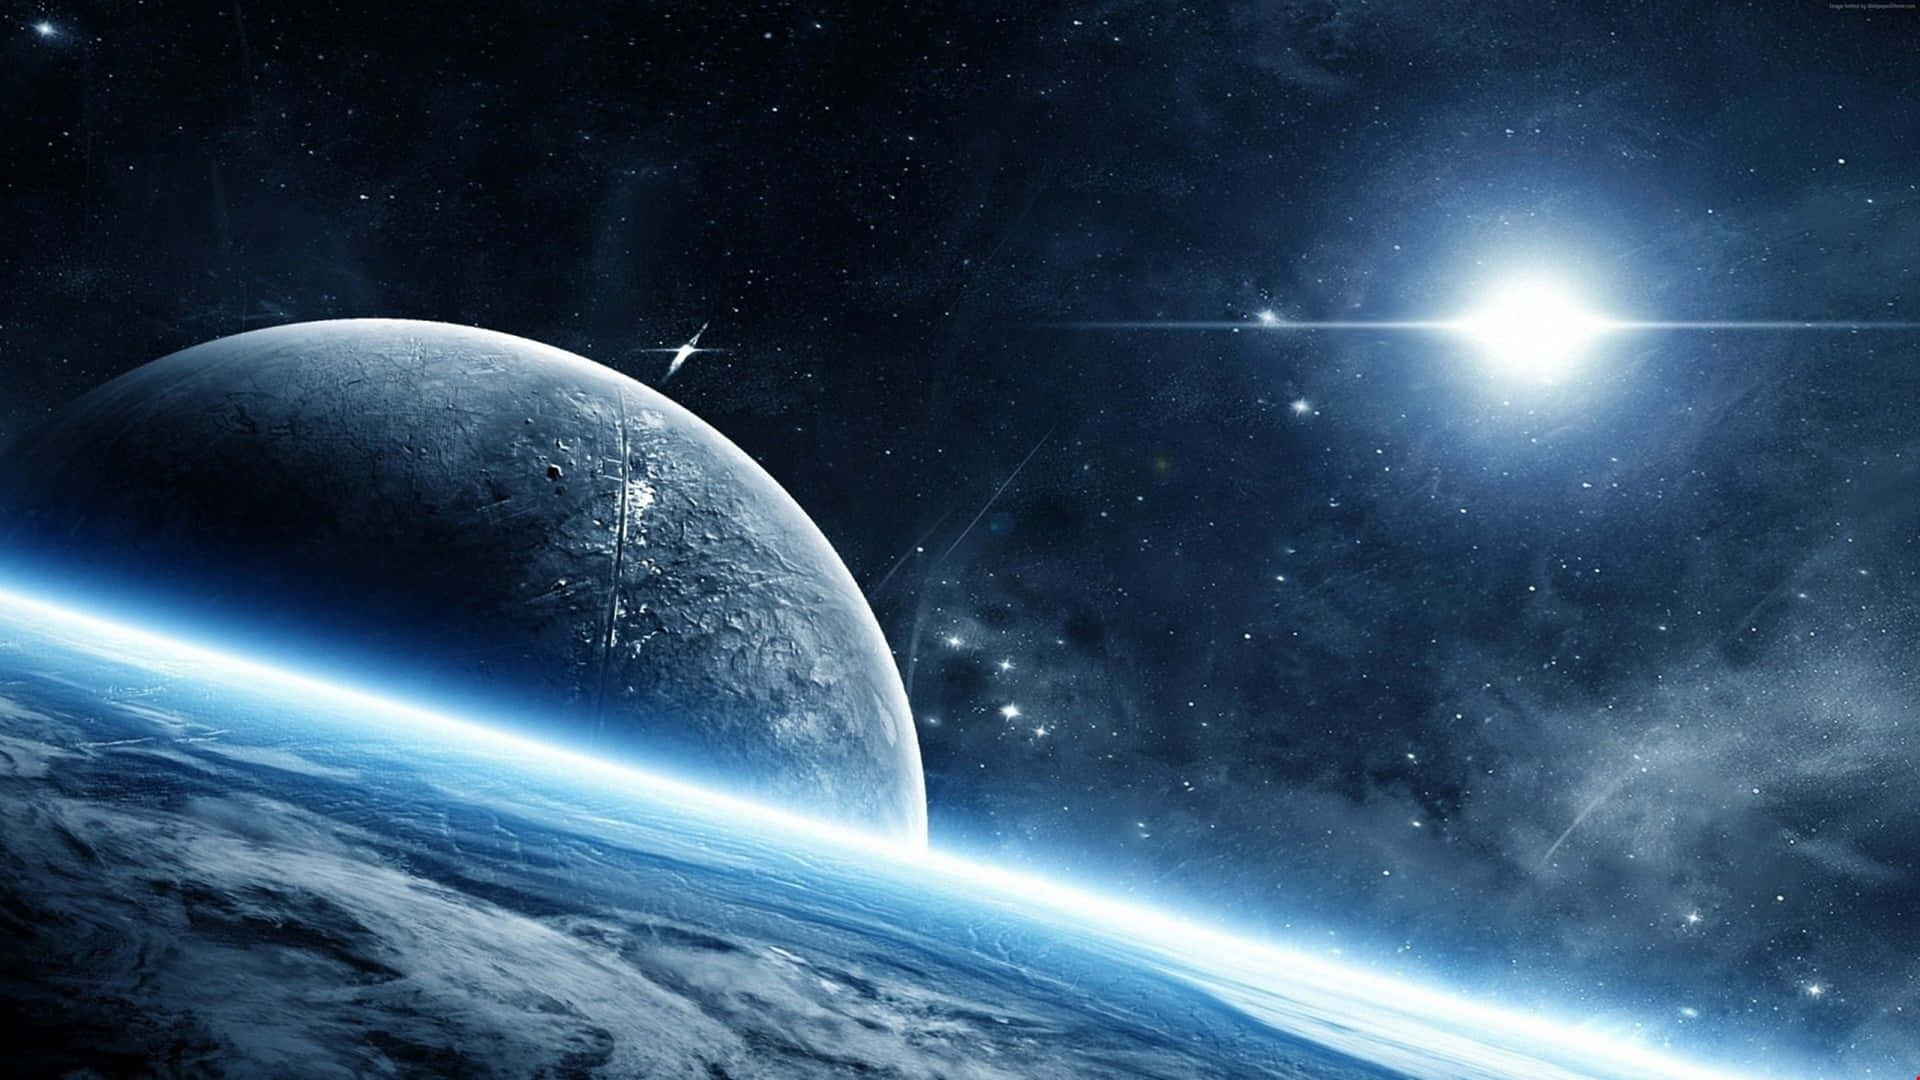 Free 4k Space Wallpaper Downloads, [200+] 4k Space Wallpapers for FREE |  